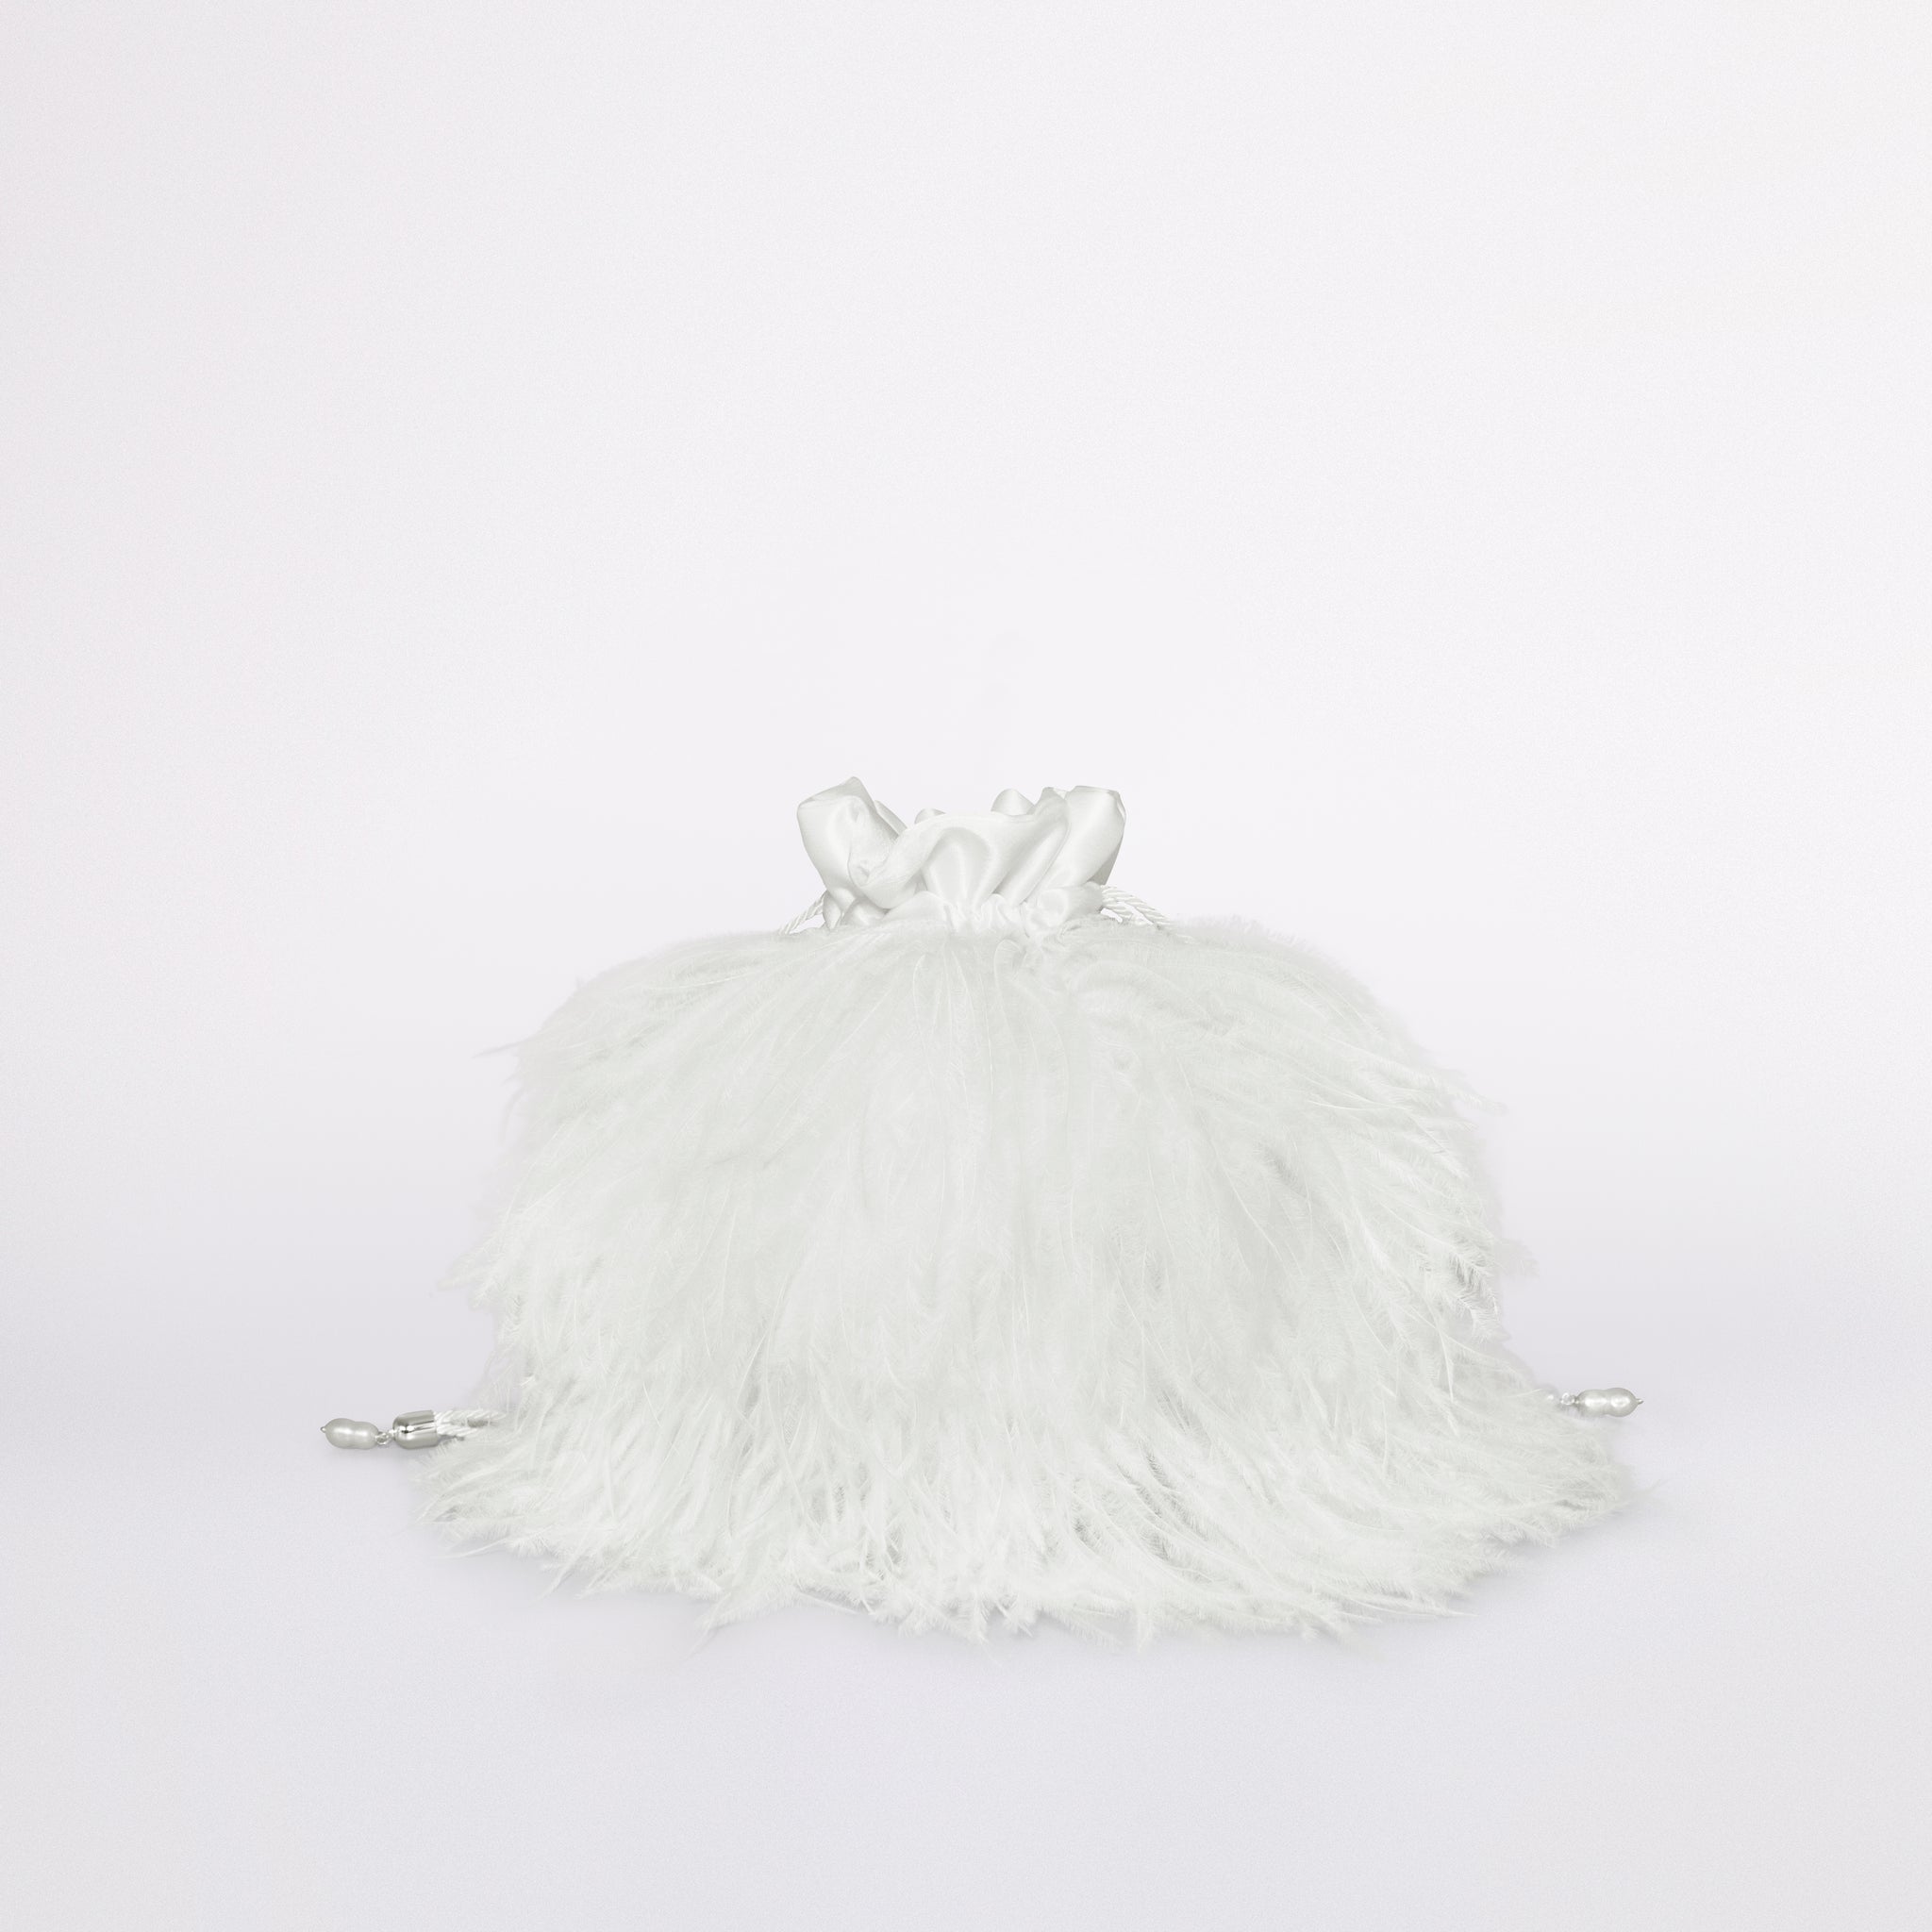 La Feathers bag in versione Love Collection